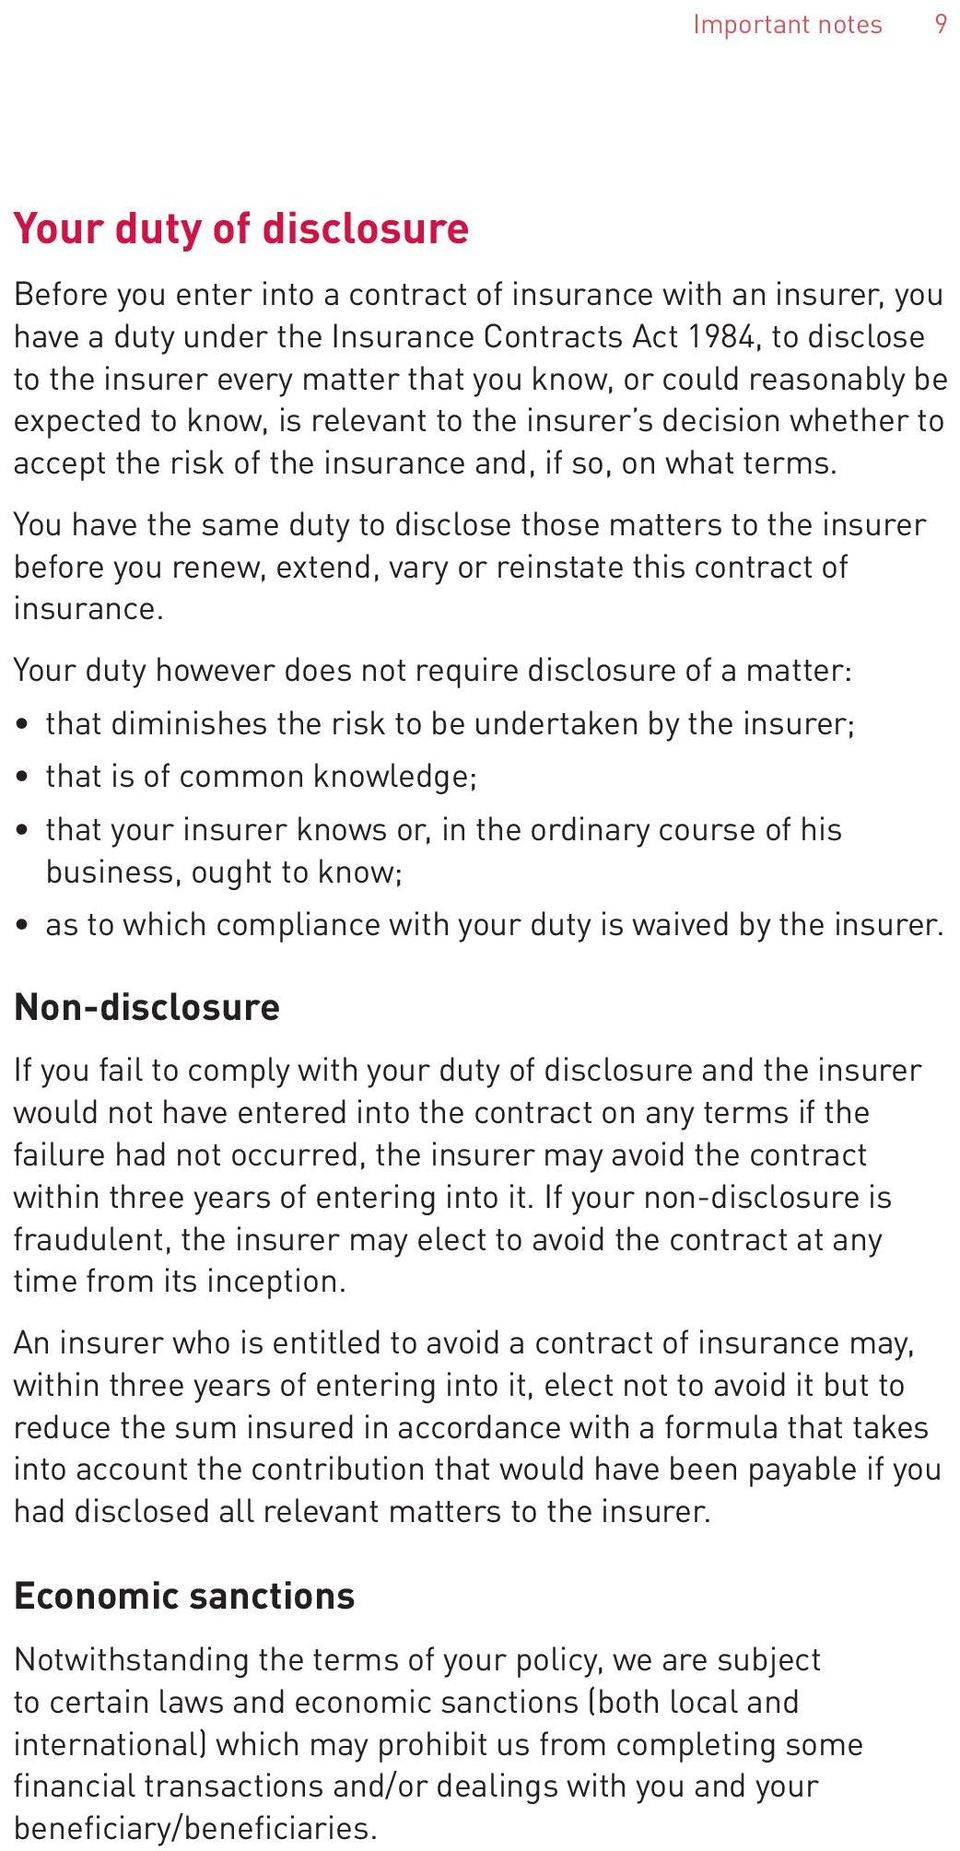 You have the same duty to disclose those matters to the insurer before you renew, extend, vary or reinstate this contract of insurance.